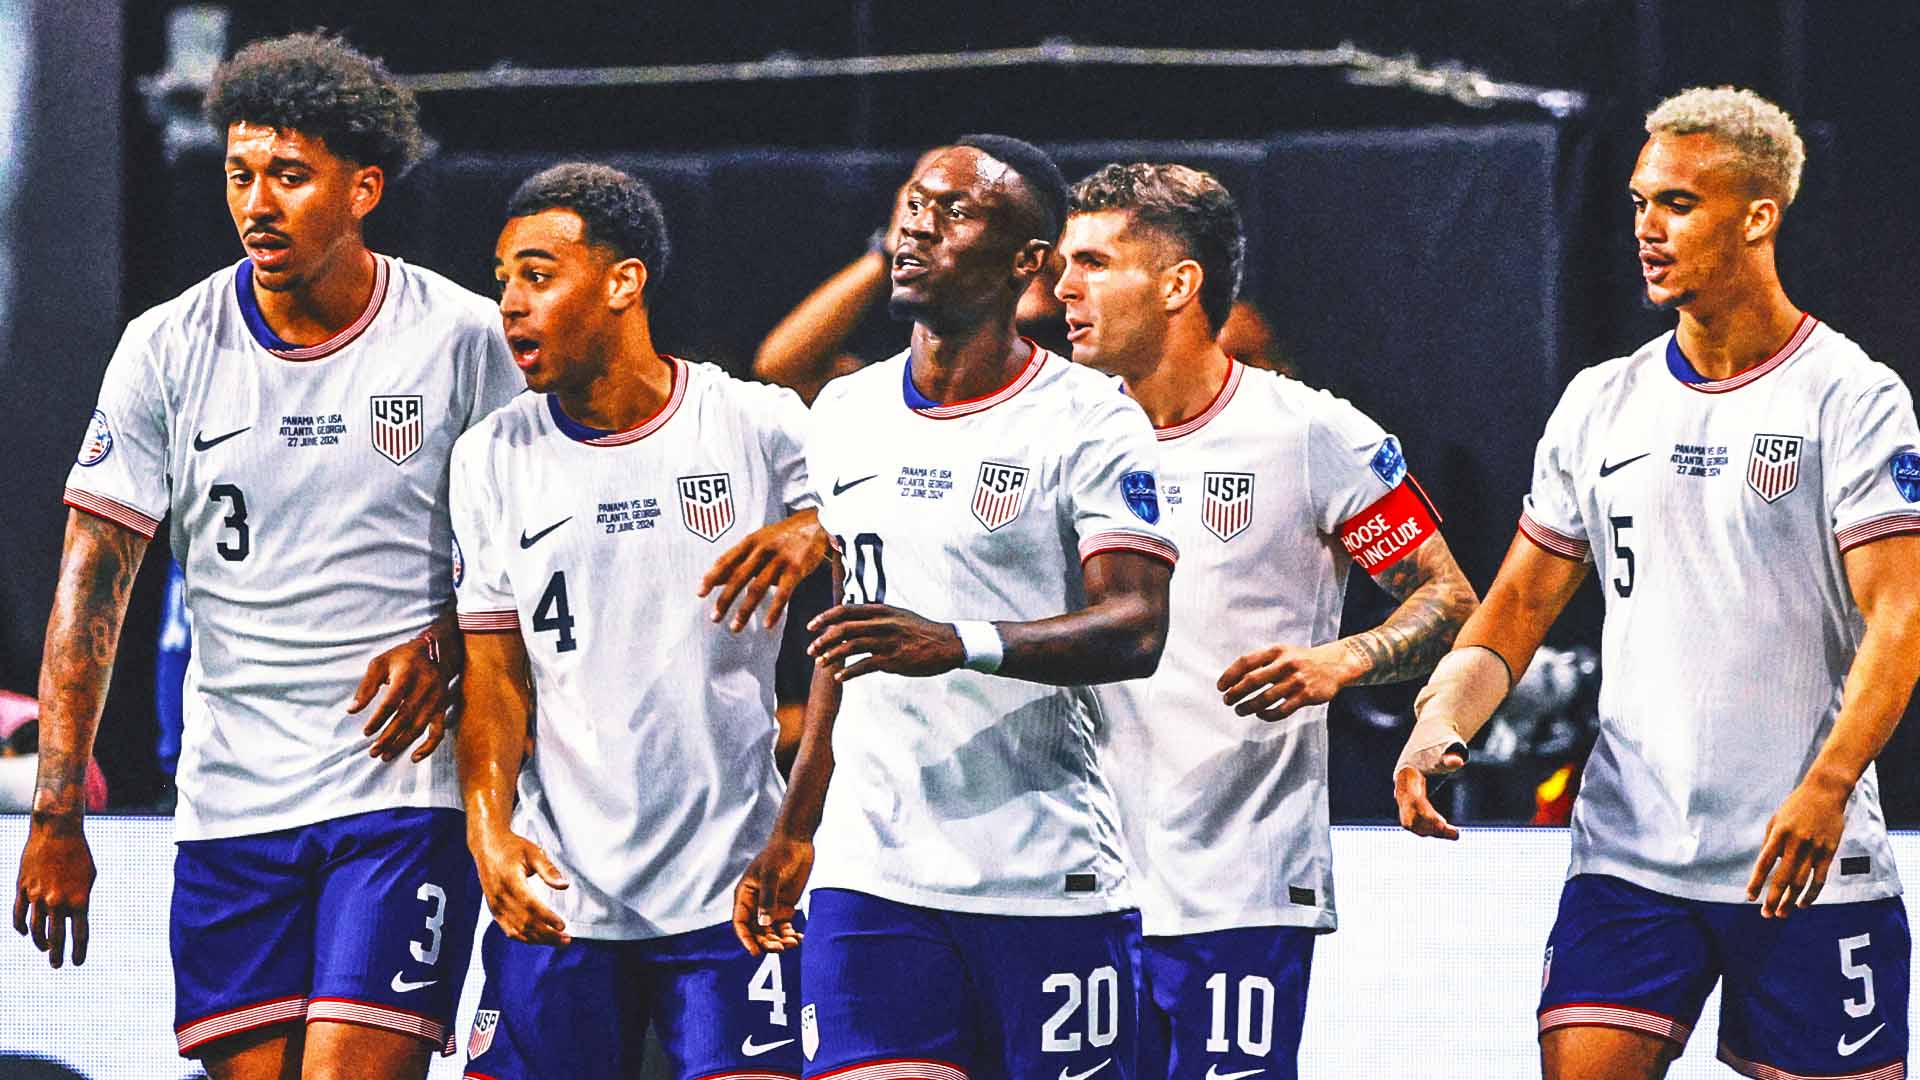 USA players on receiving racial abuse online: 'It's normal at this point'